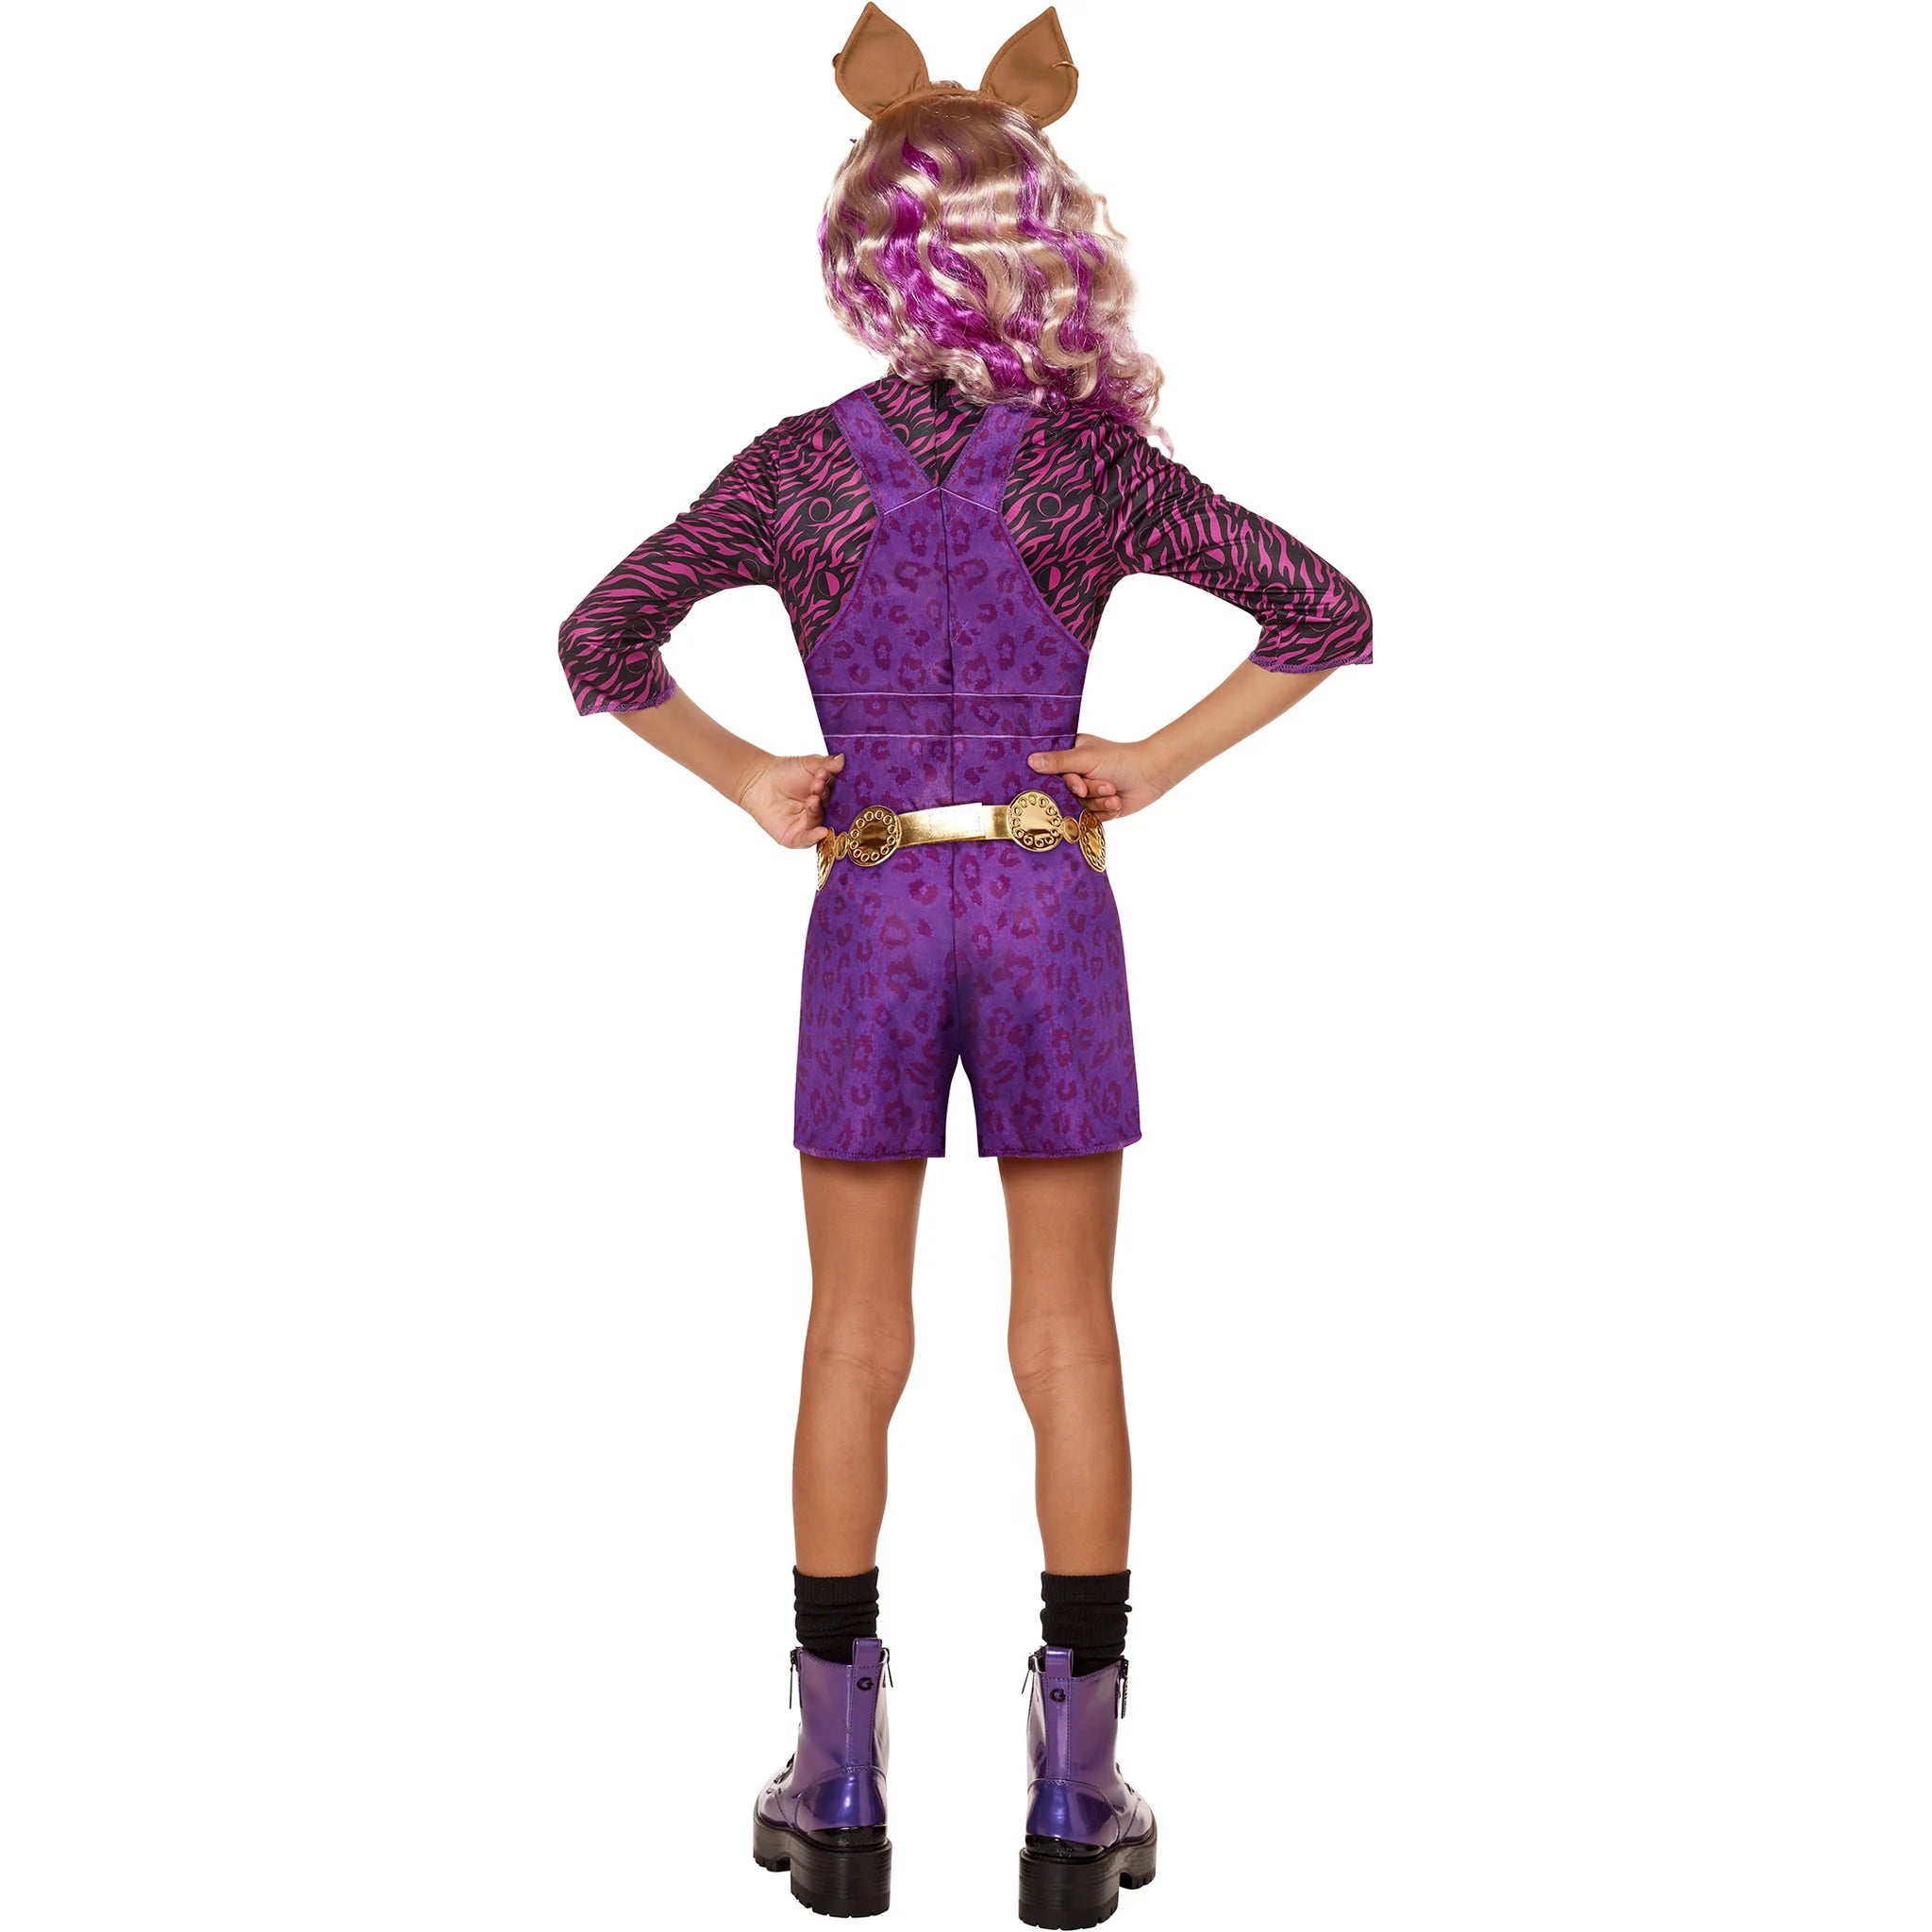 Monster High Clawdeen Wolf Child's Costume